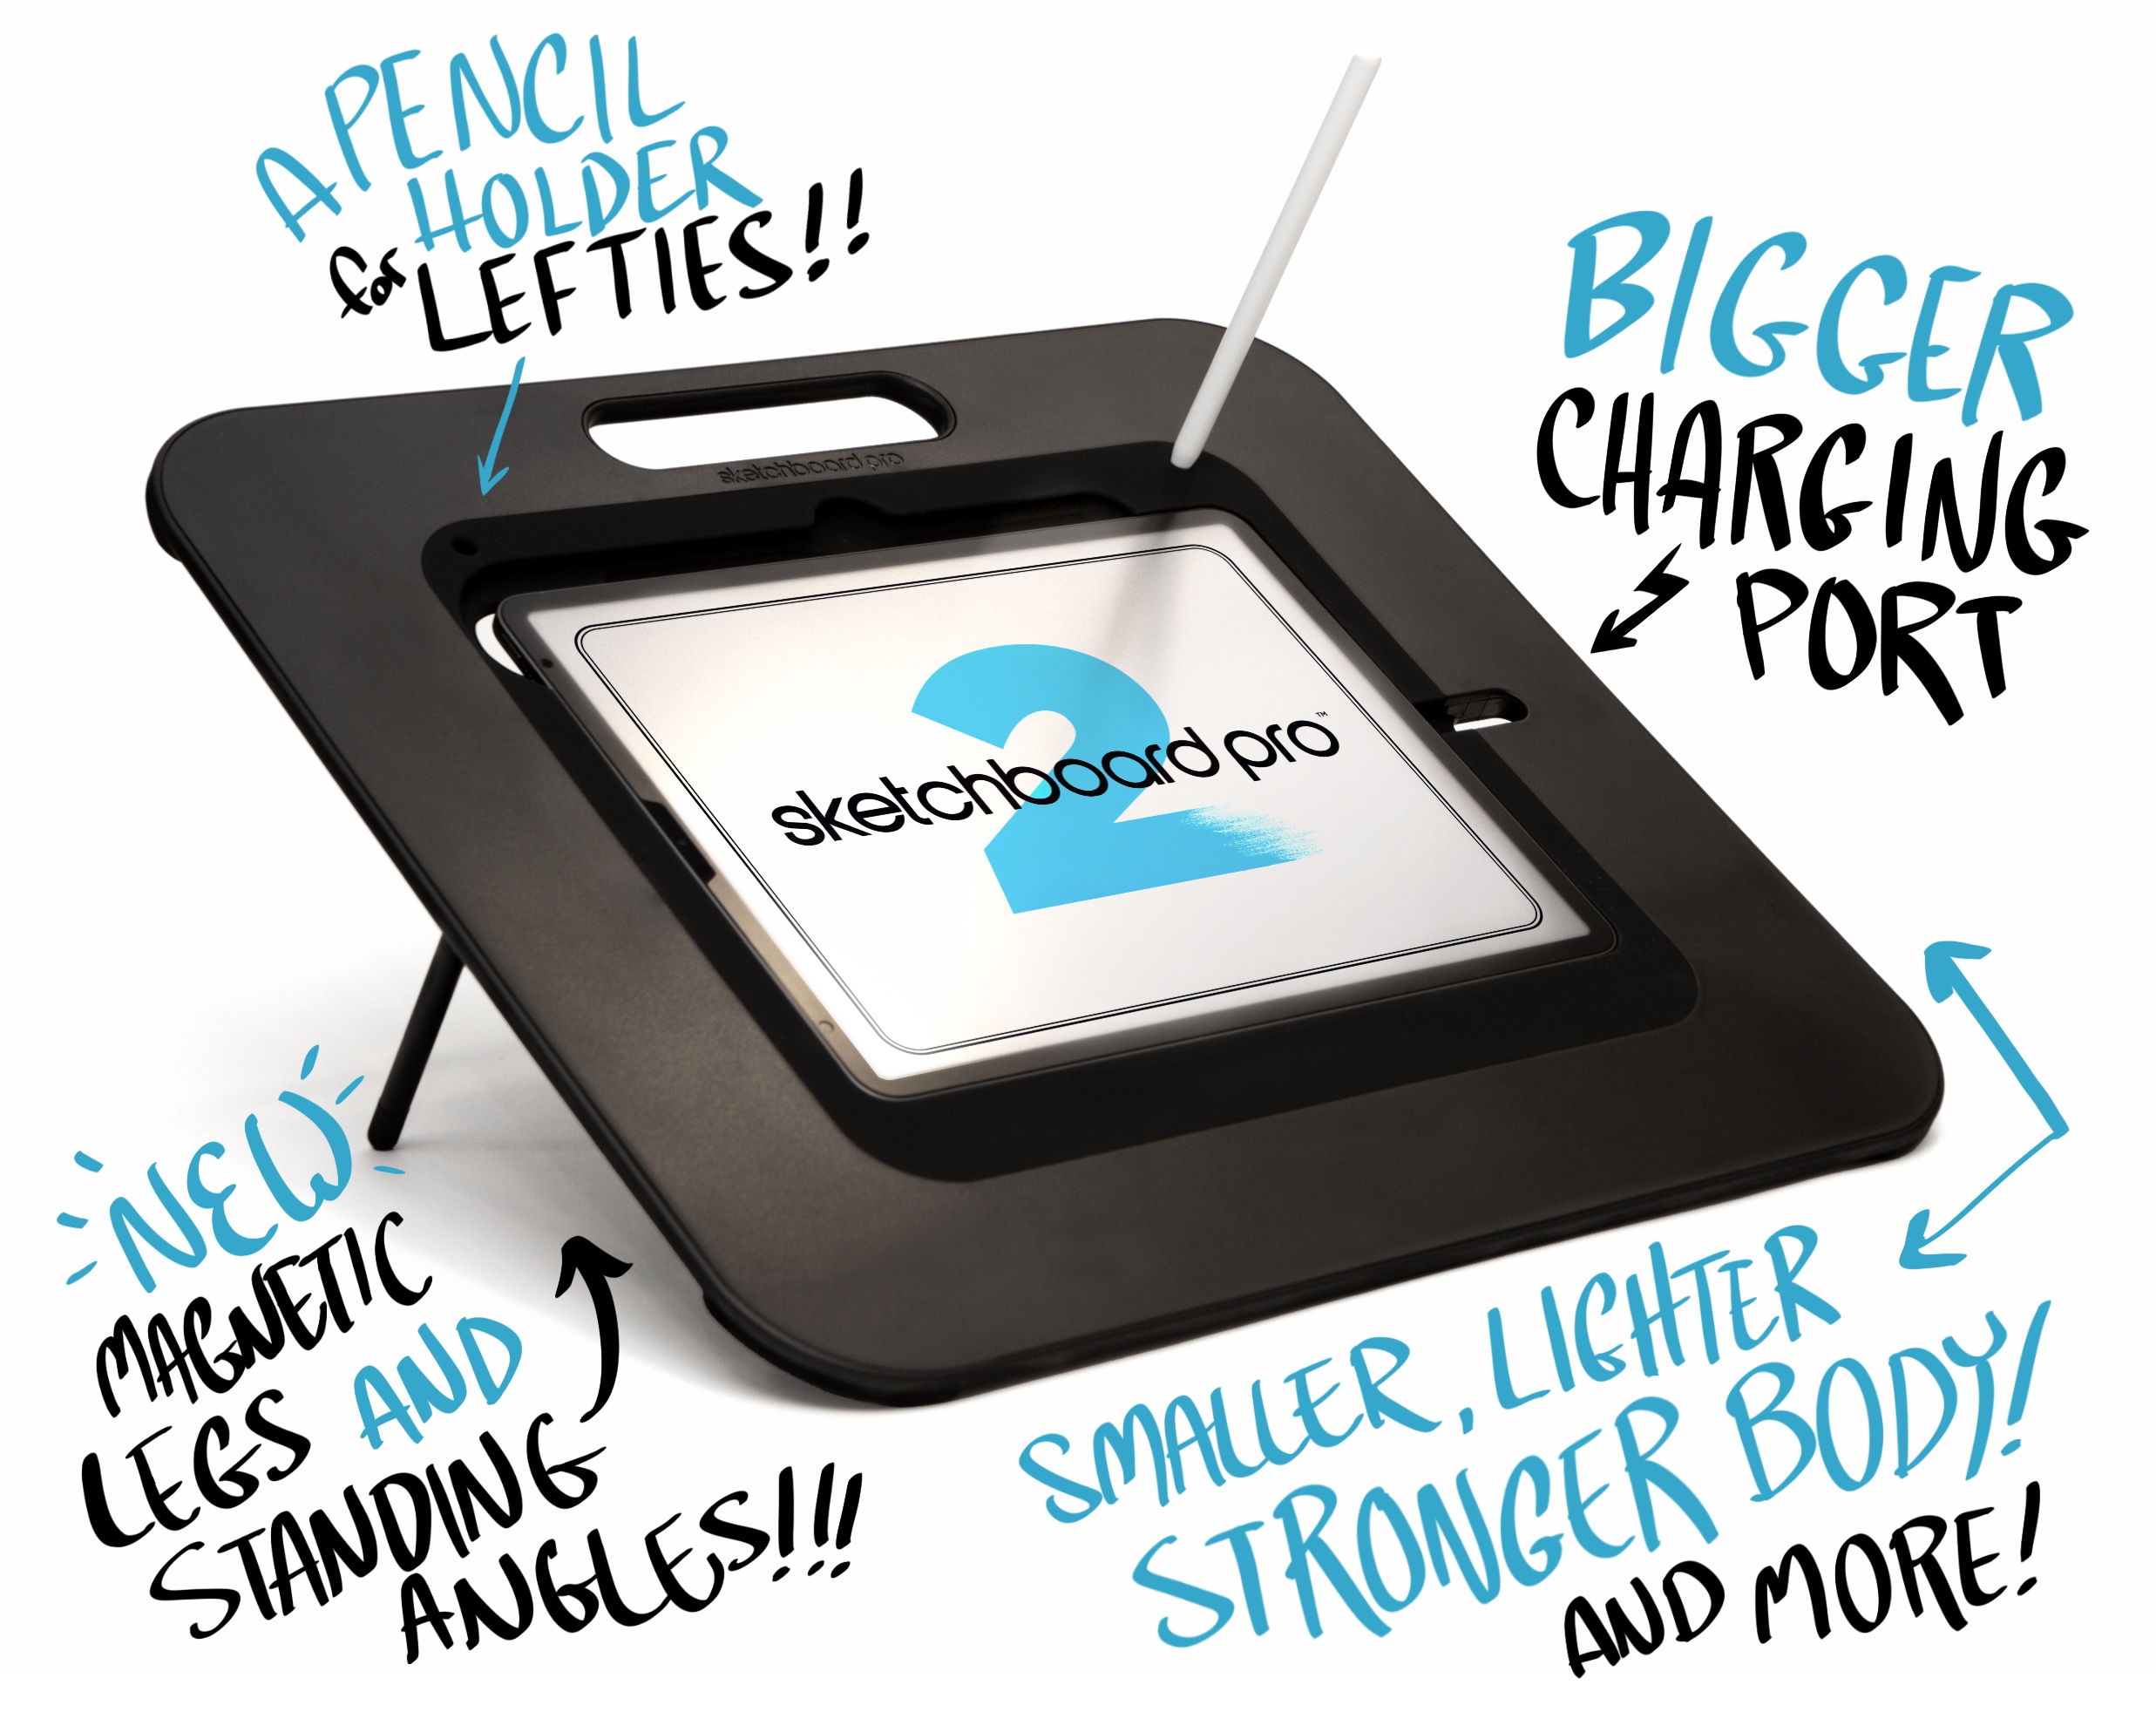 Sketchboard Pro for iPad 